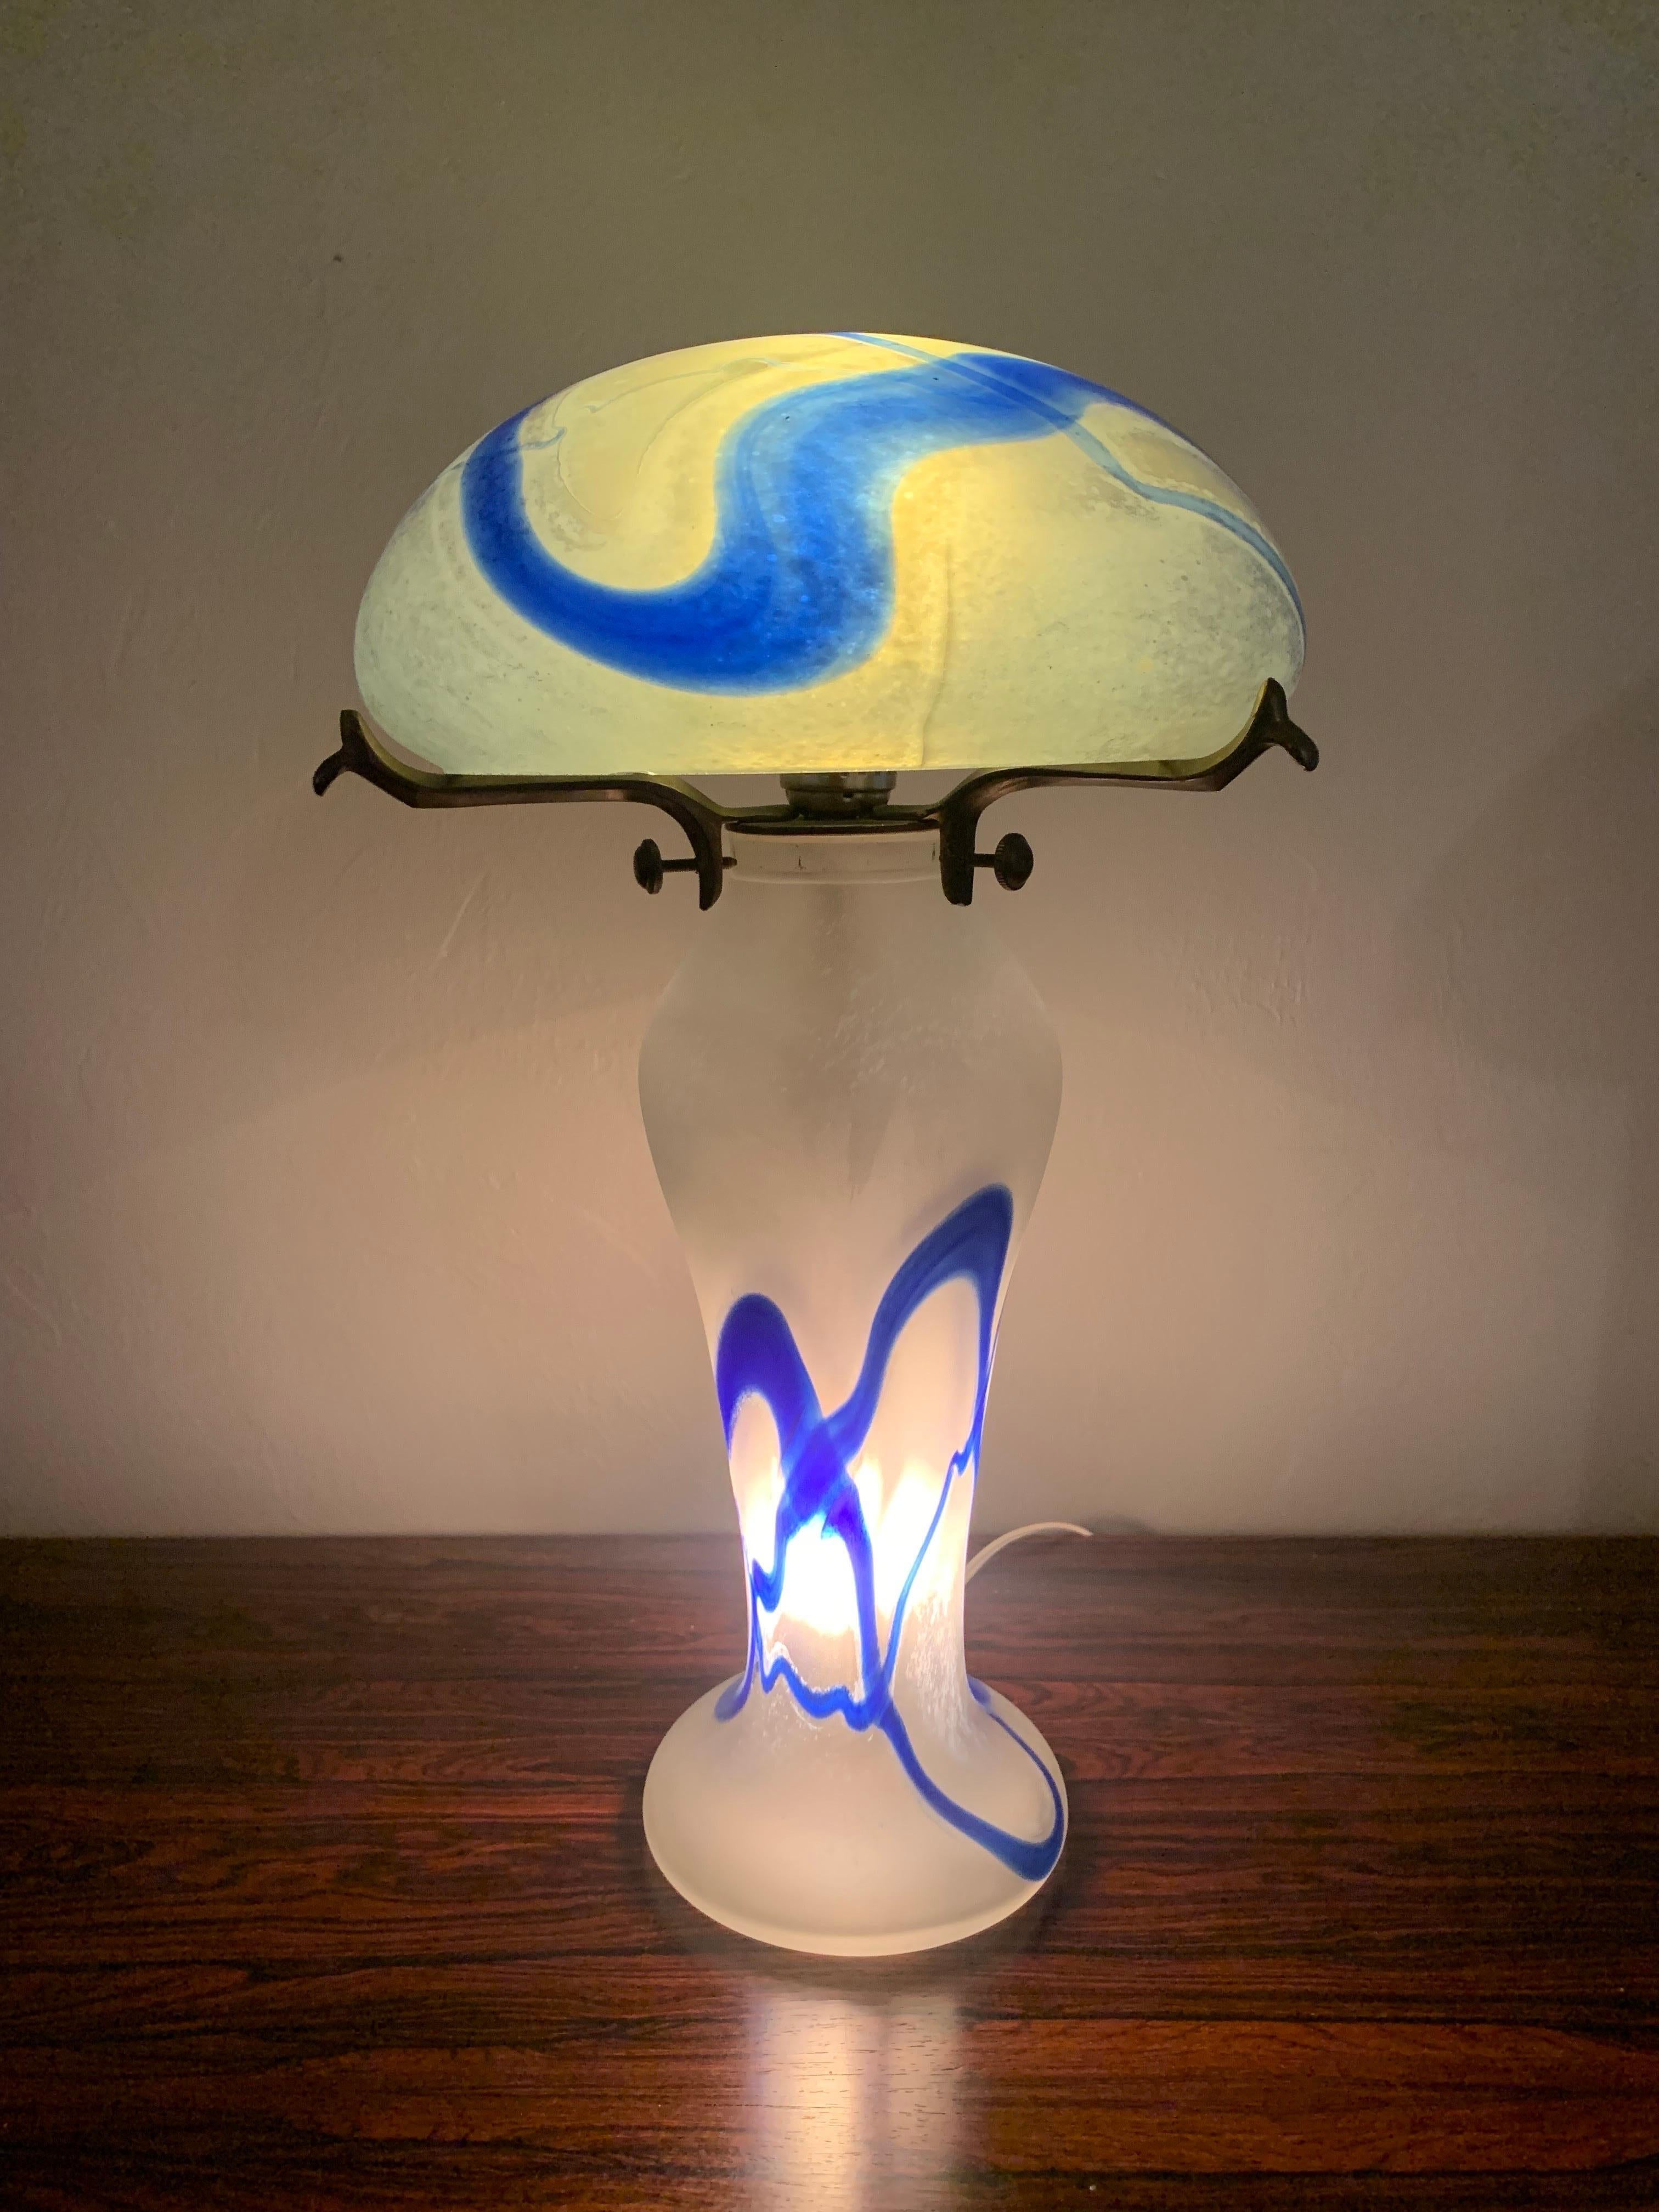 20th Century Antique French Art Nouveau Period Glass Lamp in Blue and White For Sale